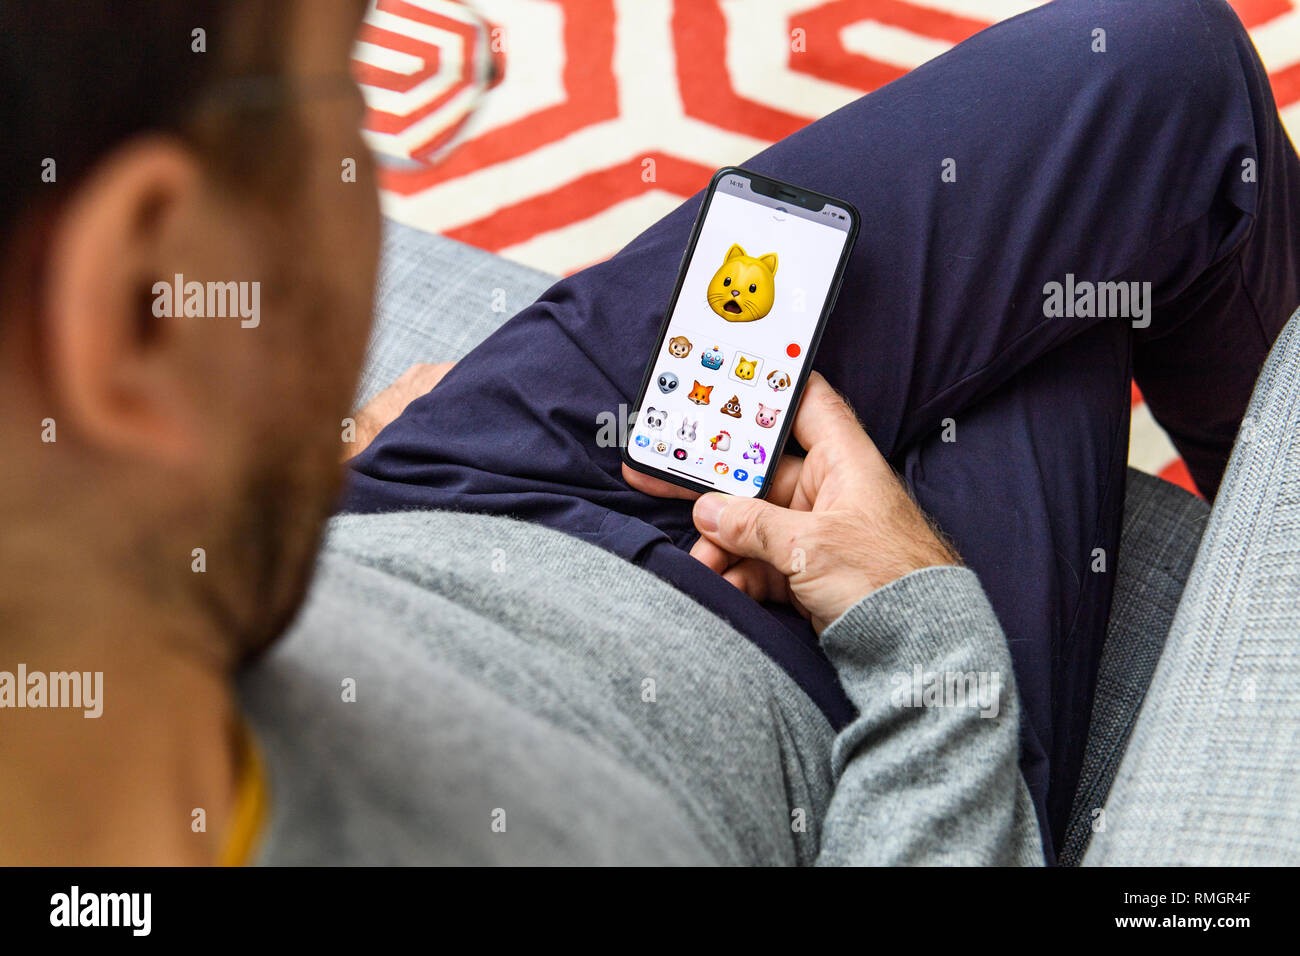 LONDON, UK - SEP 21, 2018: Man using the new astonished cat pet AR Memoji emoji face on Apple iPhone Xs with the immense OLED retina display and a12 bionic chip, Stock Photo